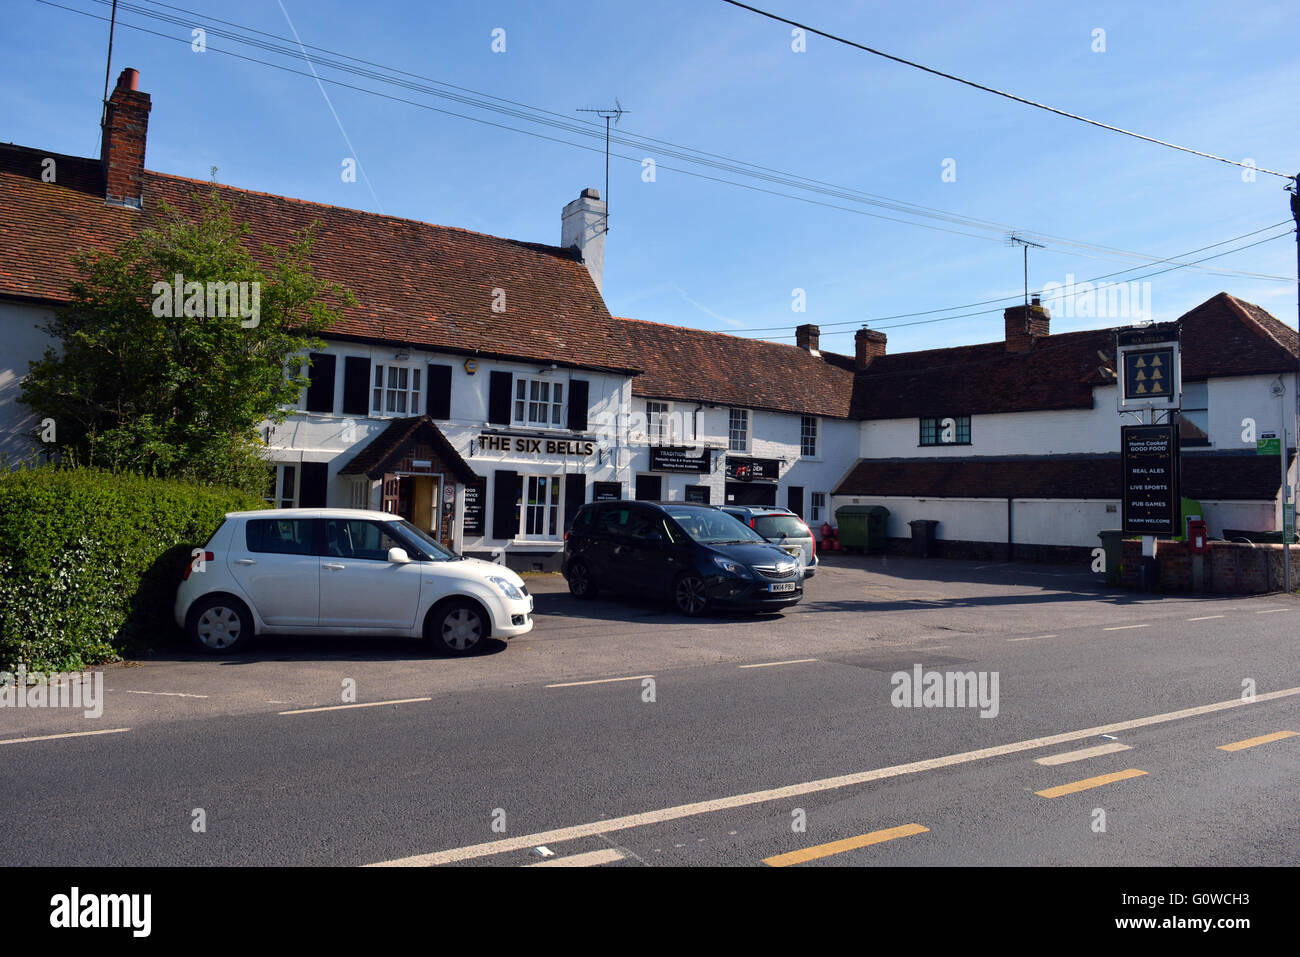 Six Bells pub in Burghfield, Reading on a sunny day. Charles Dye / Alamy Live News Stock Photo